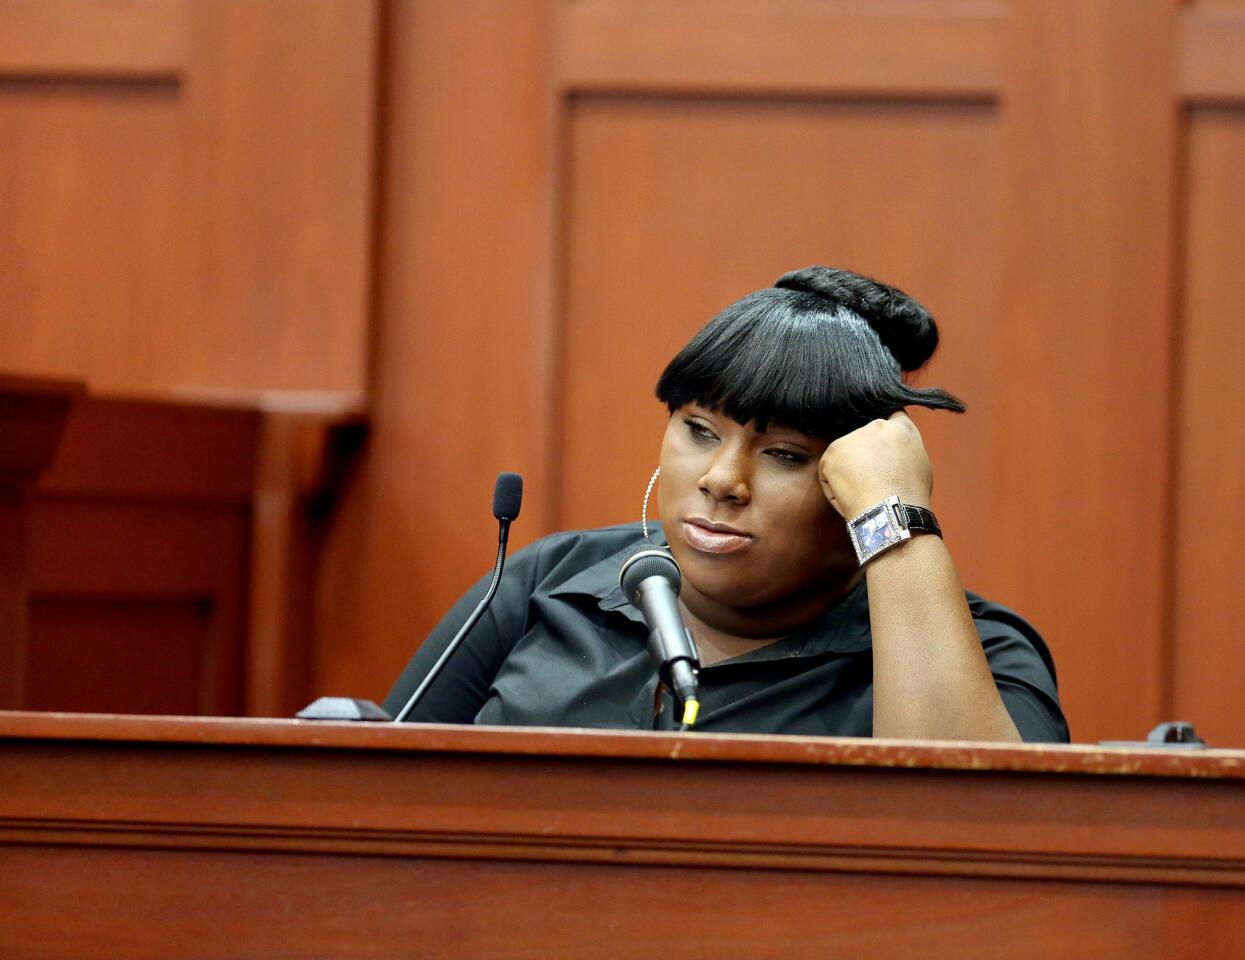 Witness Rachel Jeantel gives her testimony to the defense during George Zimmerman's trial in Seminole circuit court in Sanford, Fla. Wednesday, June 26, 2013. Zimmerman has been charged with second-degree murder for the 2012 shooting death of Trayvon Martin. (Jacob Langston/Orlando Sentinel)